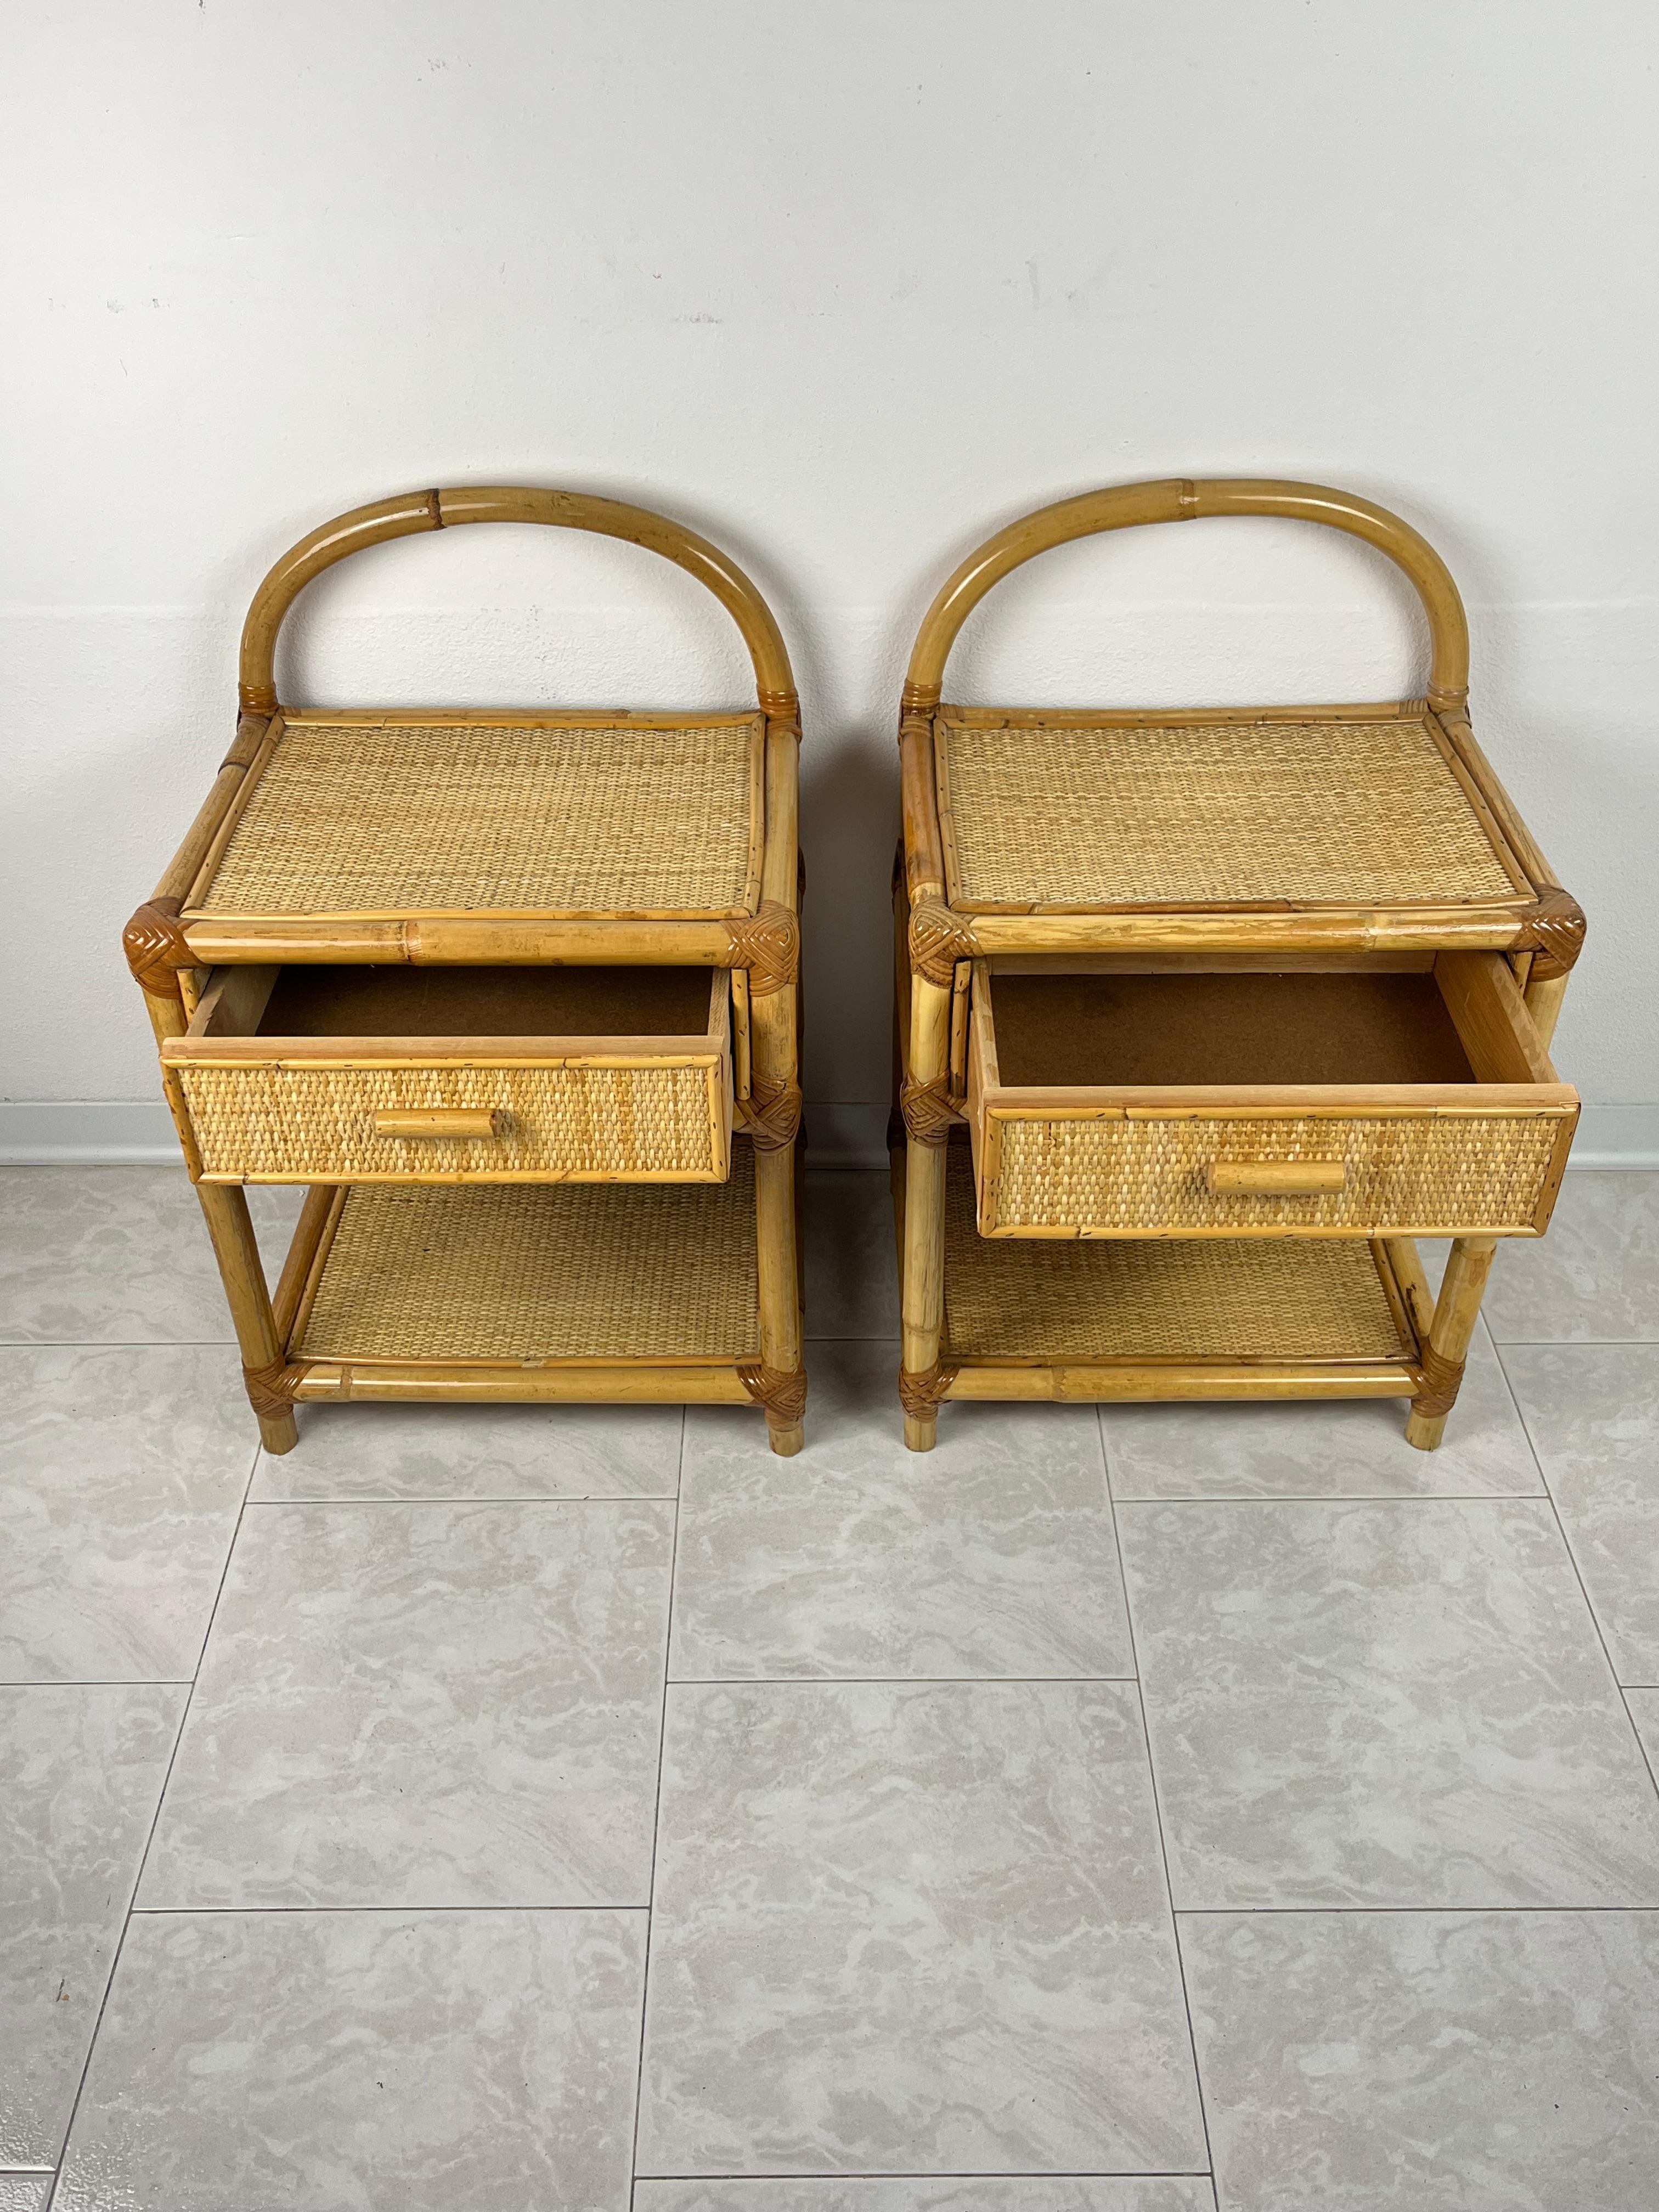 Pair of Vintage bamboo and rattan bedside tables, Italy, 1970s
Good condition, small signs of wear. Everyone has a drawer.
Found in a Sicilian villa.